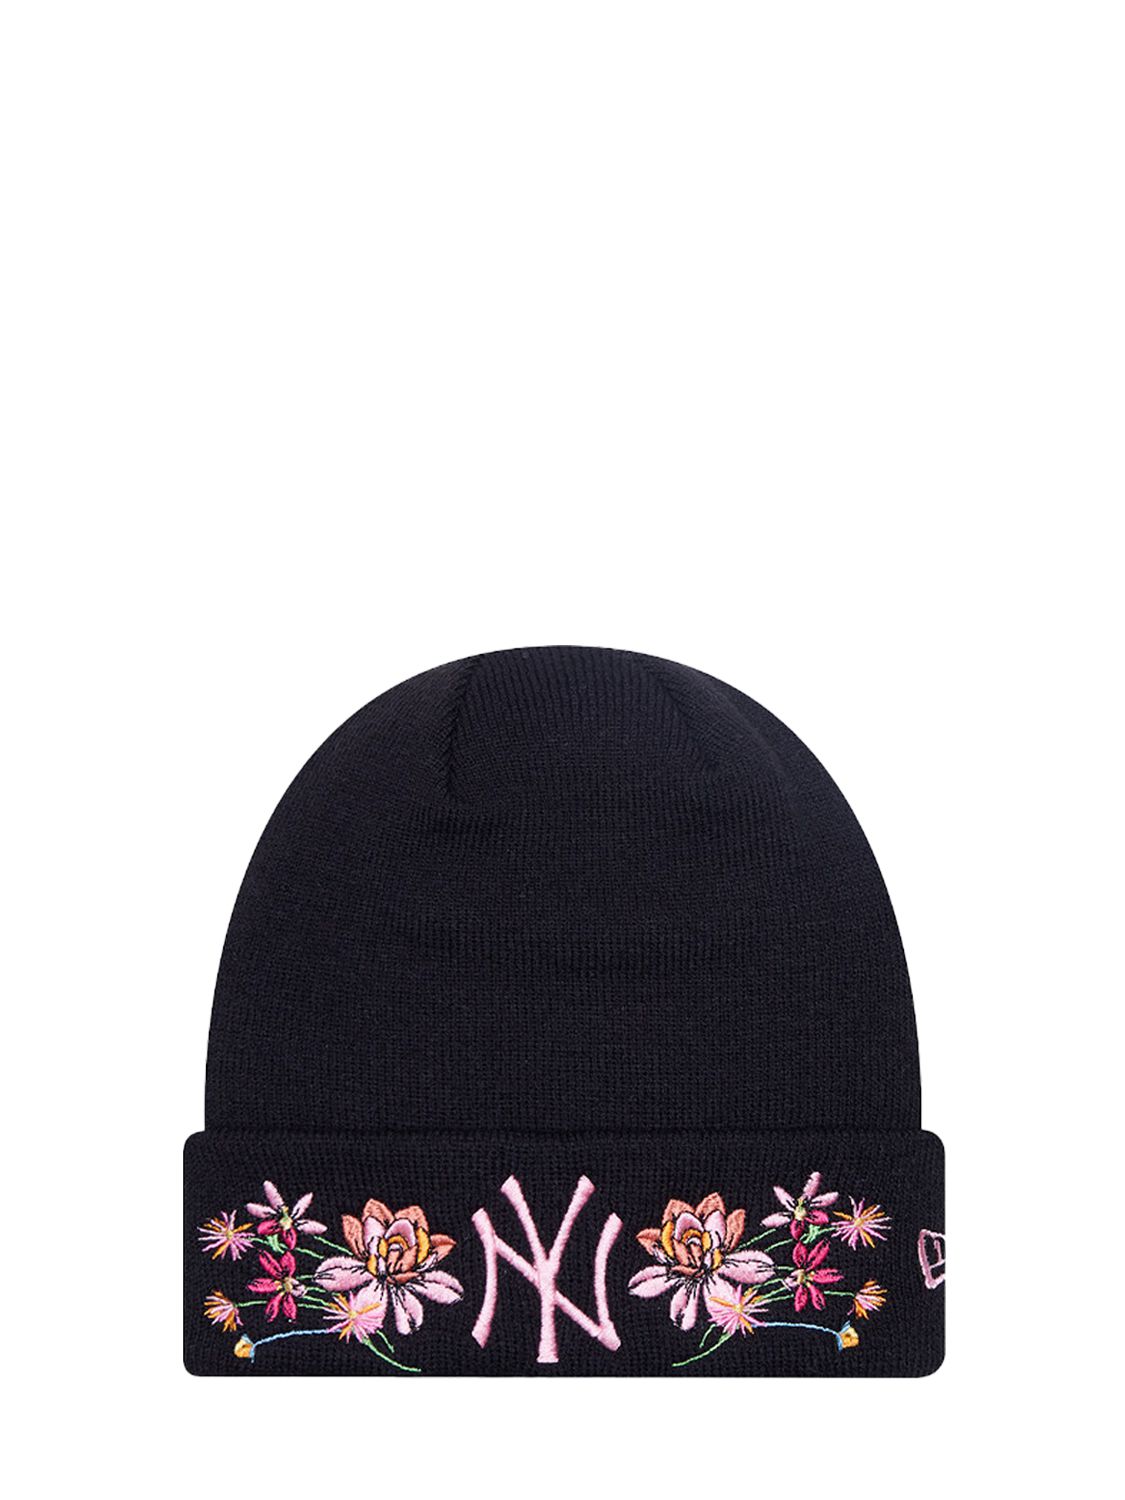 Yankees Embroidered Tech Beanie